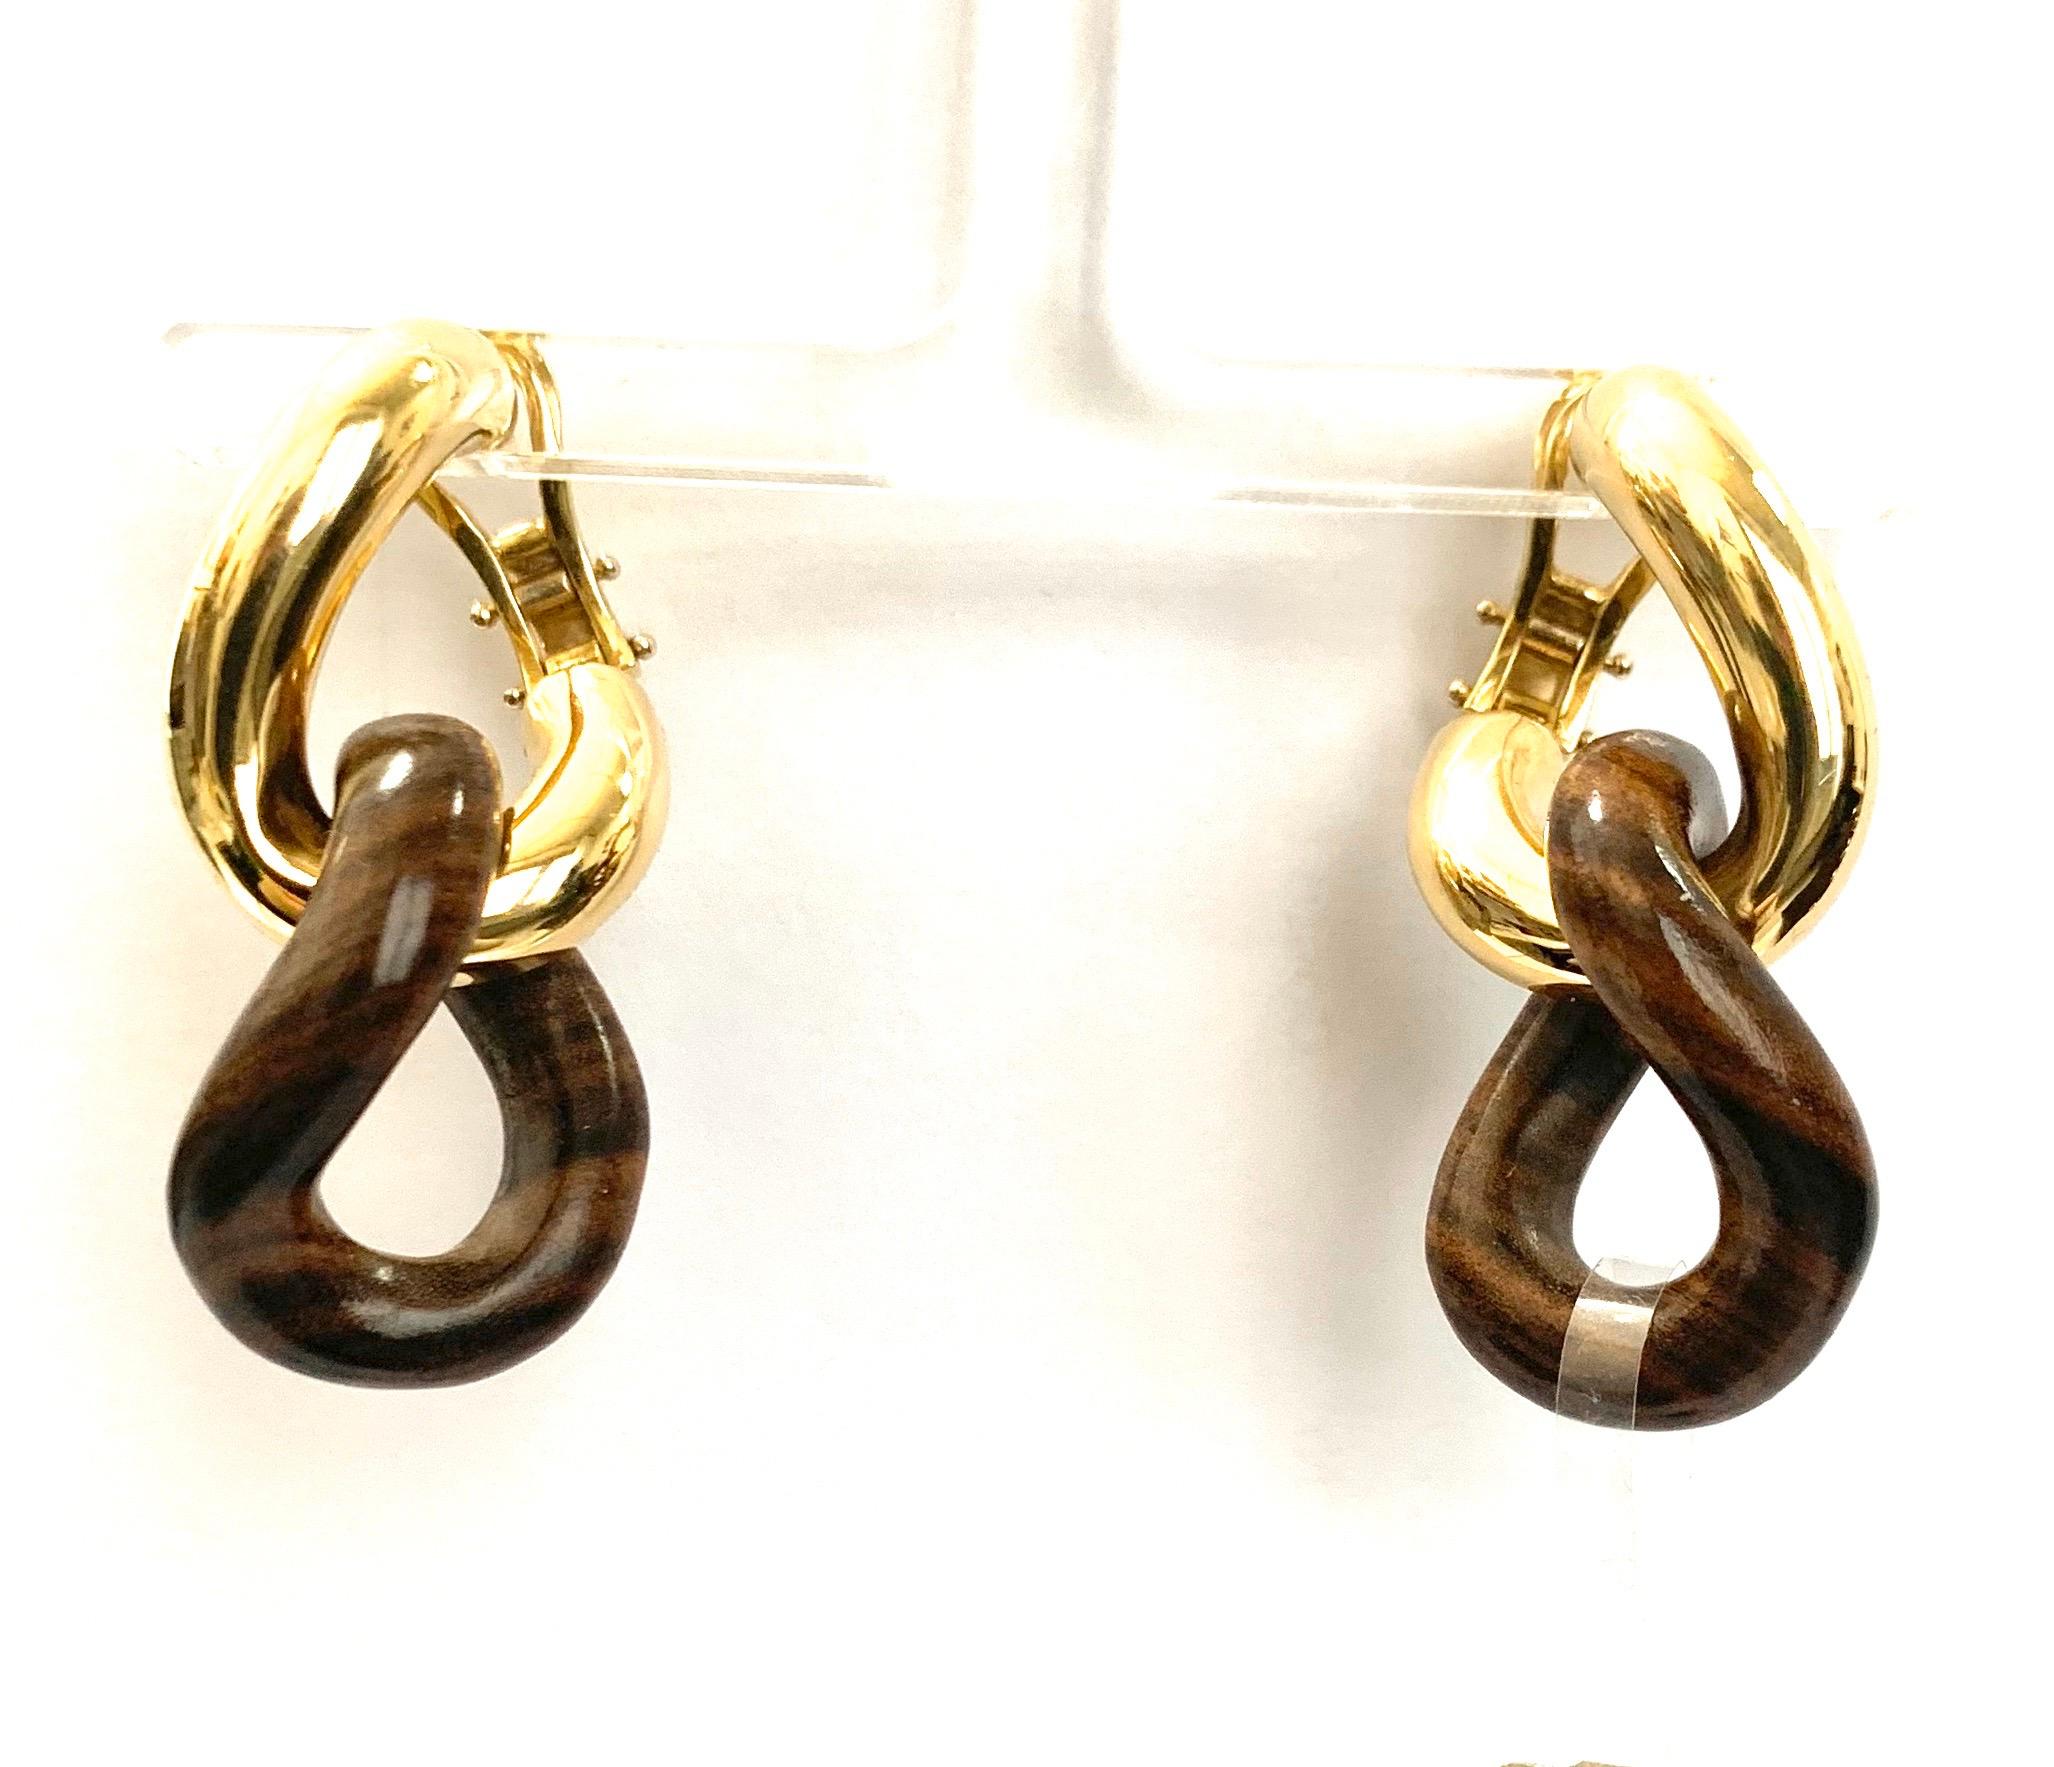 Rose wood groumette pair of earrings in 18 kt yellow gold
The rose wood is the most elegant wood and even the most precious.
This iconic collection in Micheletto tradition was originally made only in gold just more or less 10 years ago it became